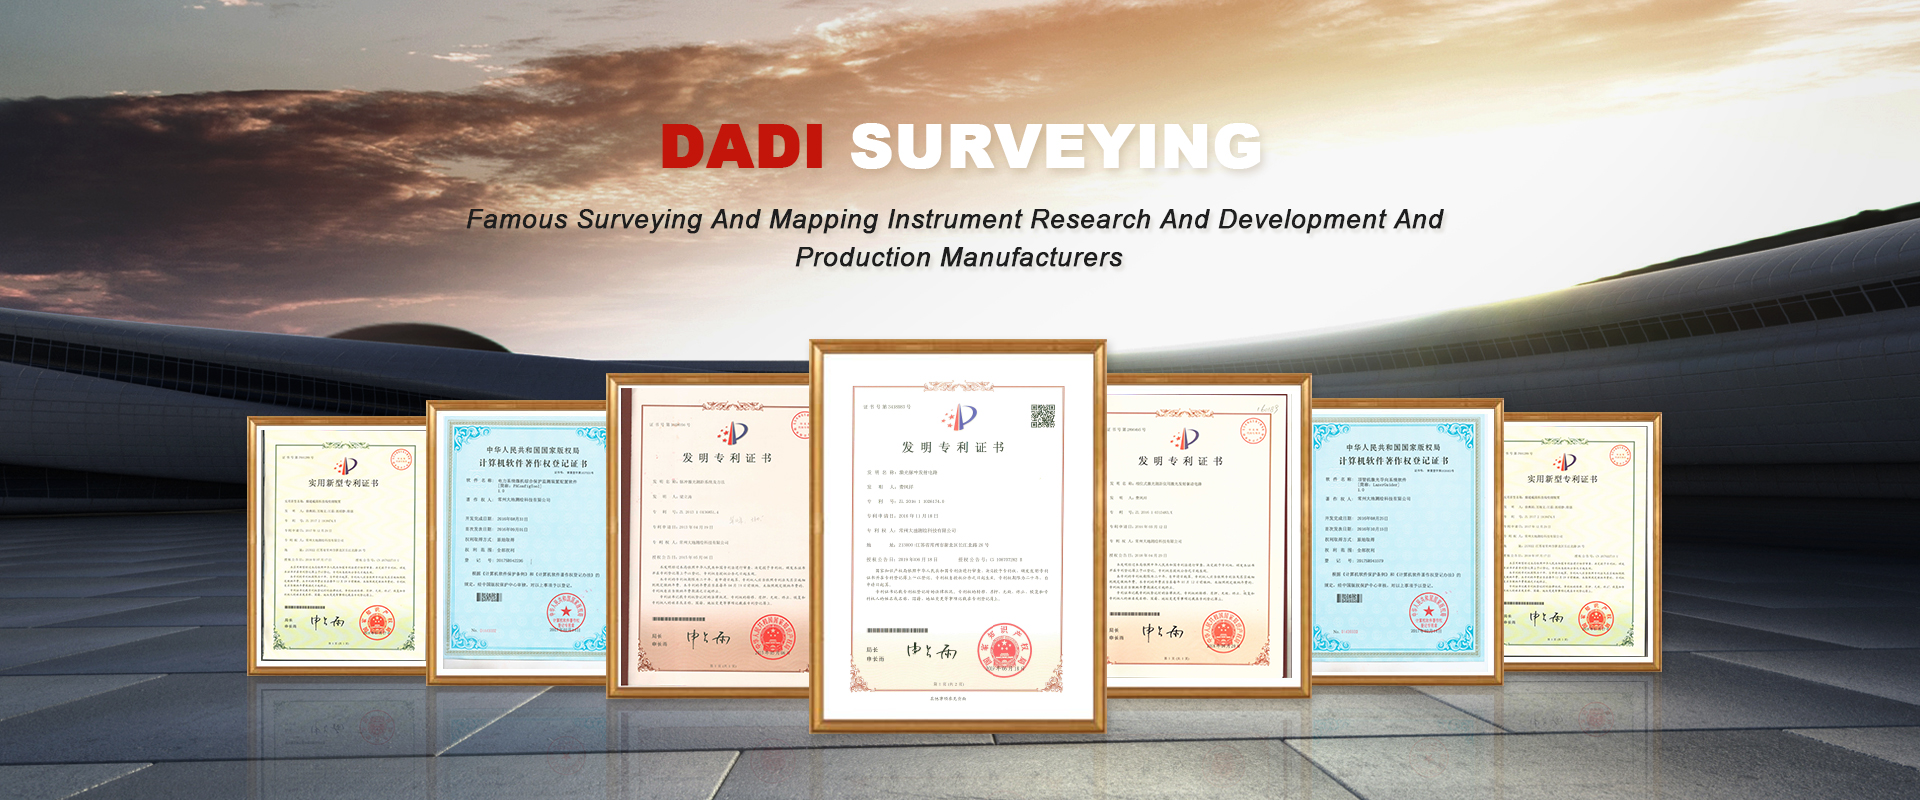 Famous Surveying And Mapping Instrument Research And Development And  Production Manufacturers